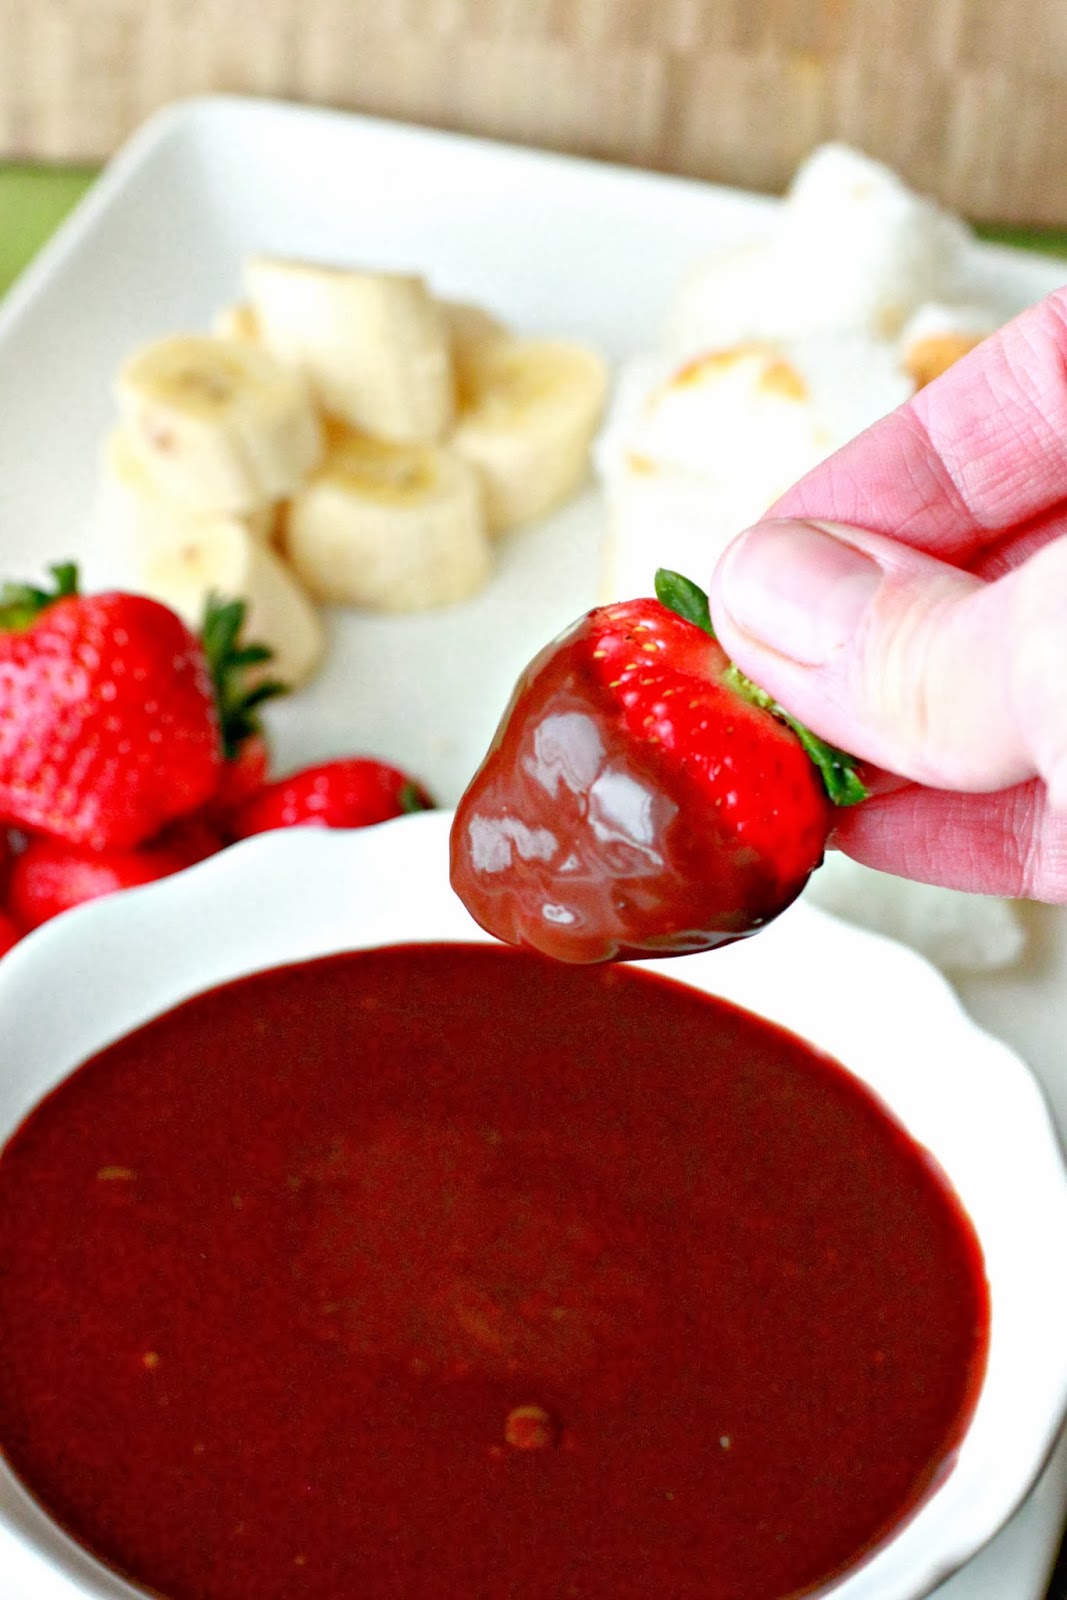 Larissa Another Day: Slow Cooker Chocolate Fondue (Slow Cooker Saturday)